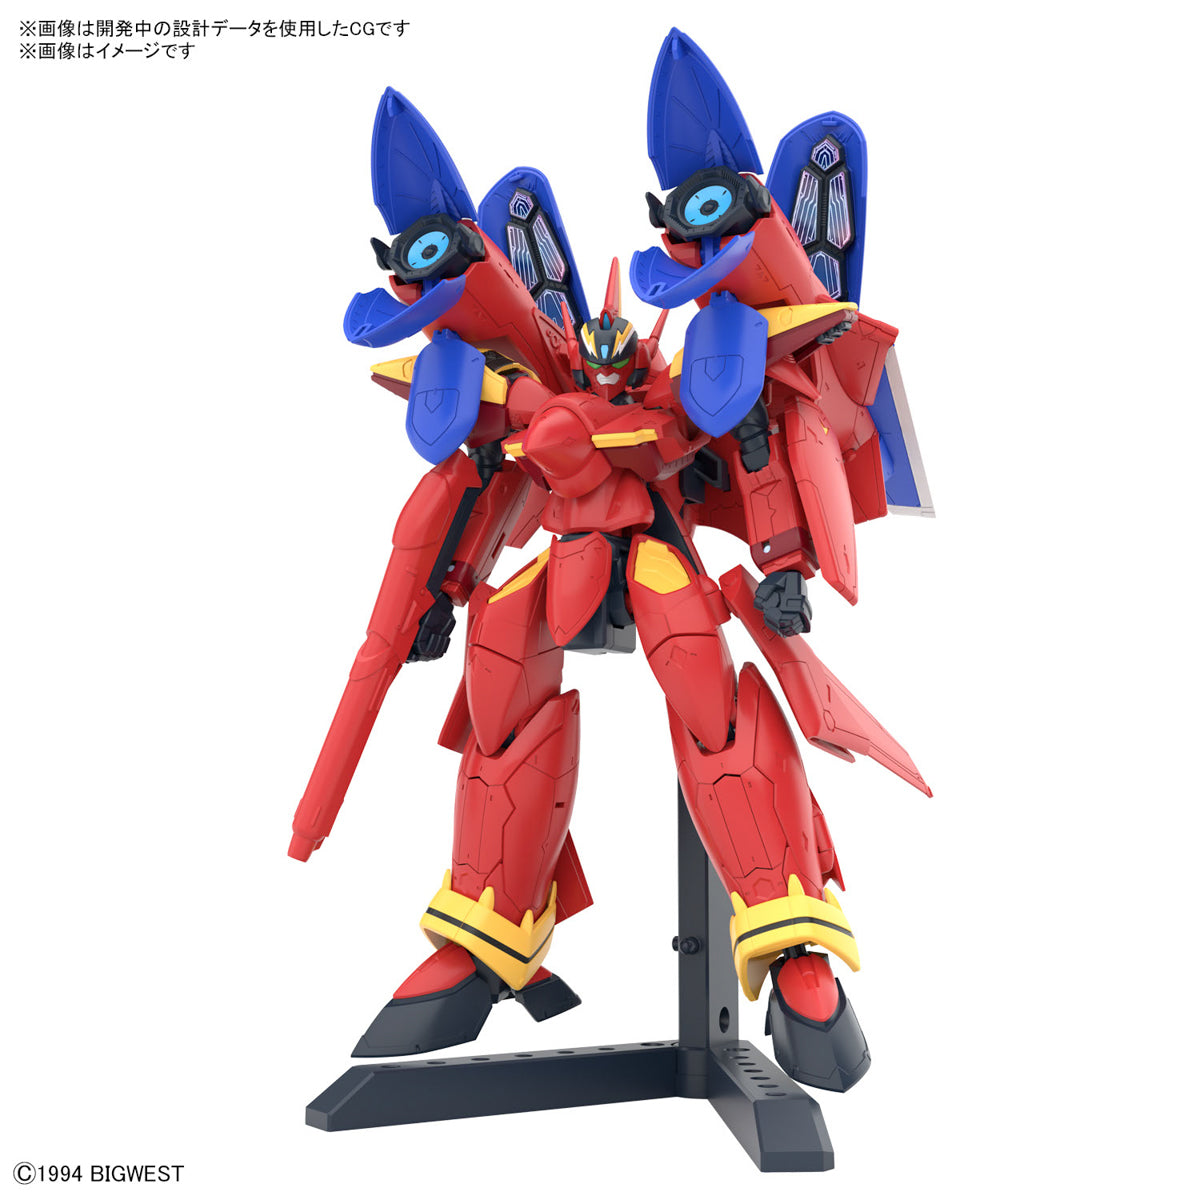 Bandai Macross Plus HG 1/100 YF-19 Fire Valkyrie with Sound Booster Plastic Model Action Toy VCA Gundam Singapore